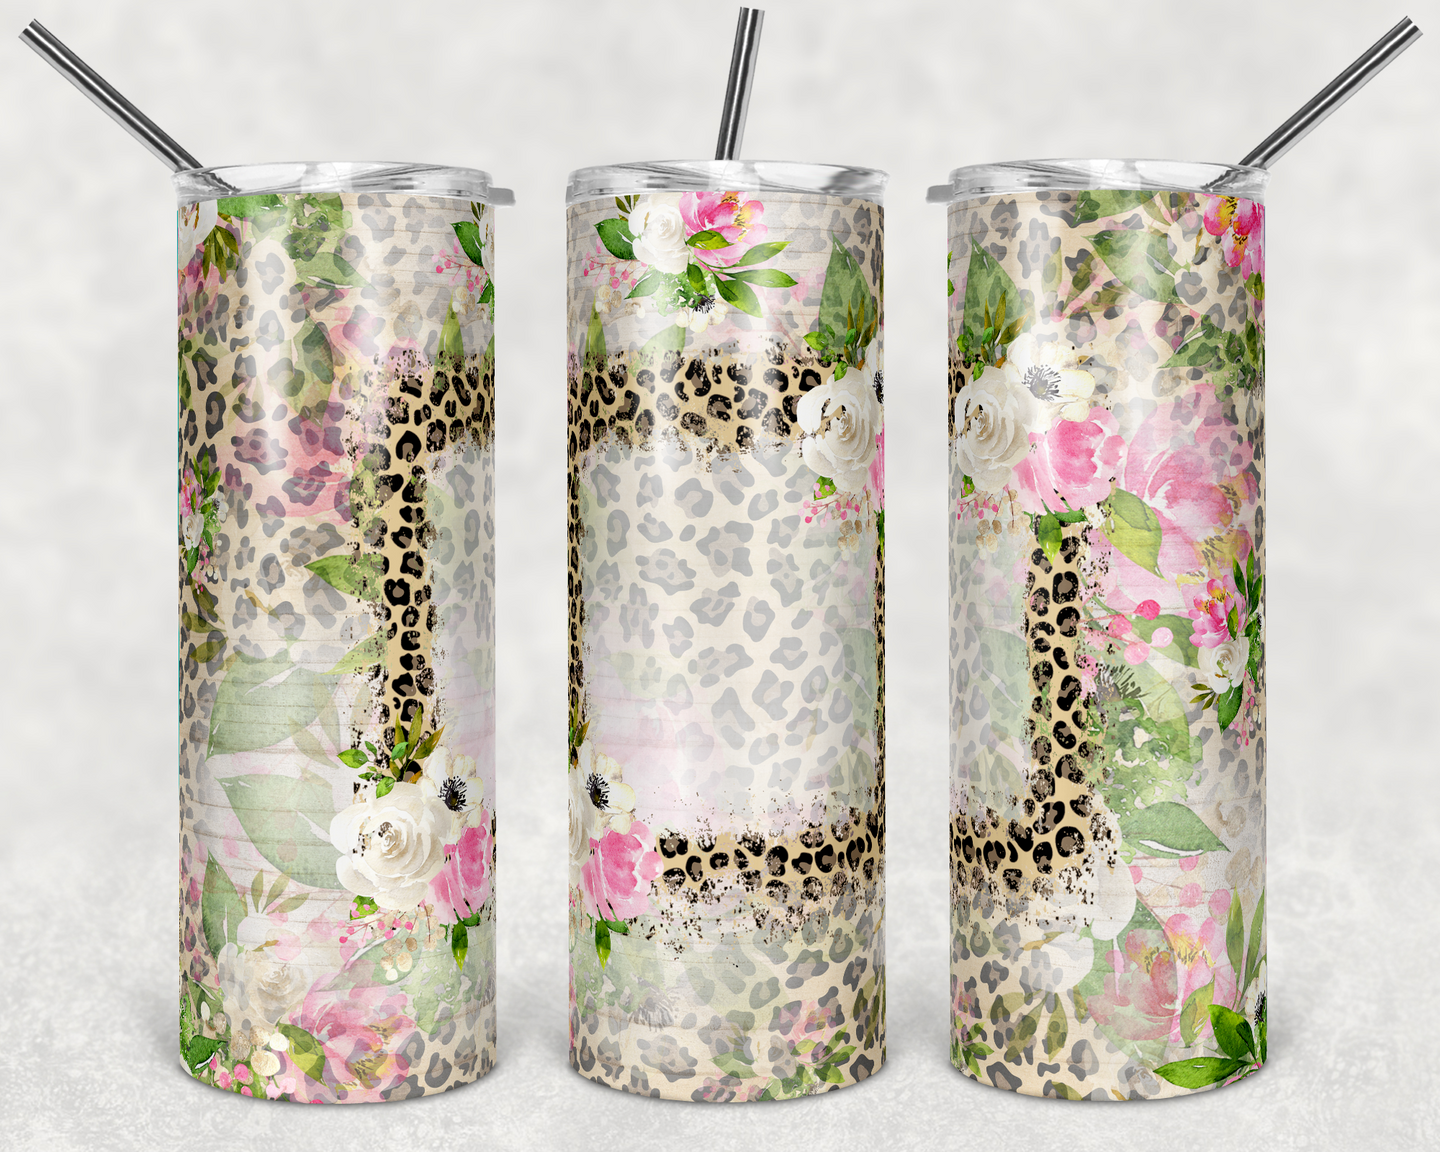 Leopard Print and Spring Flowers with Blank